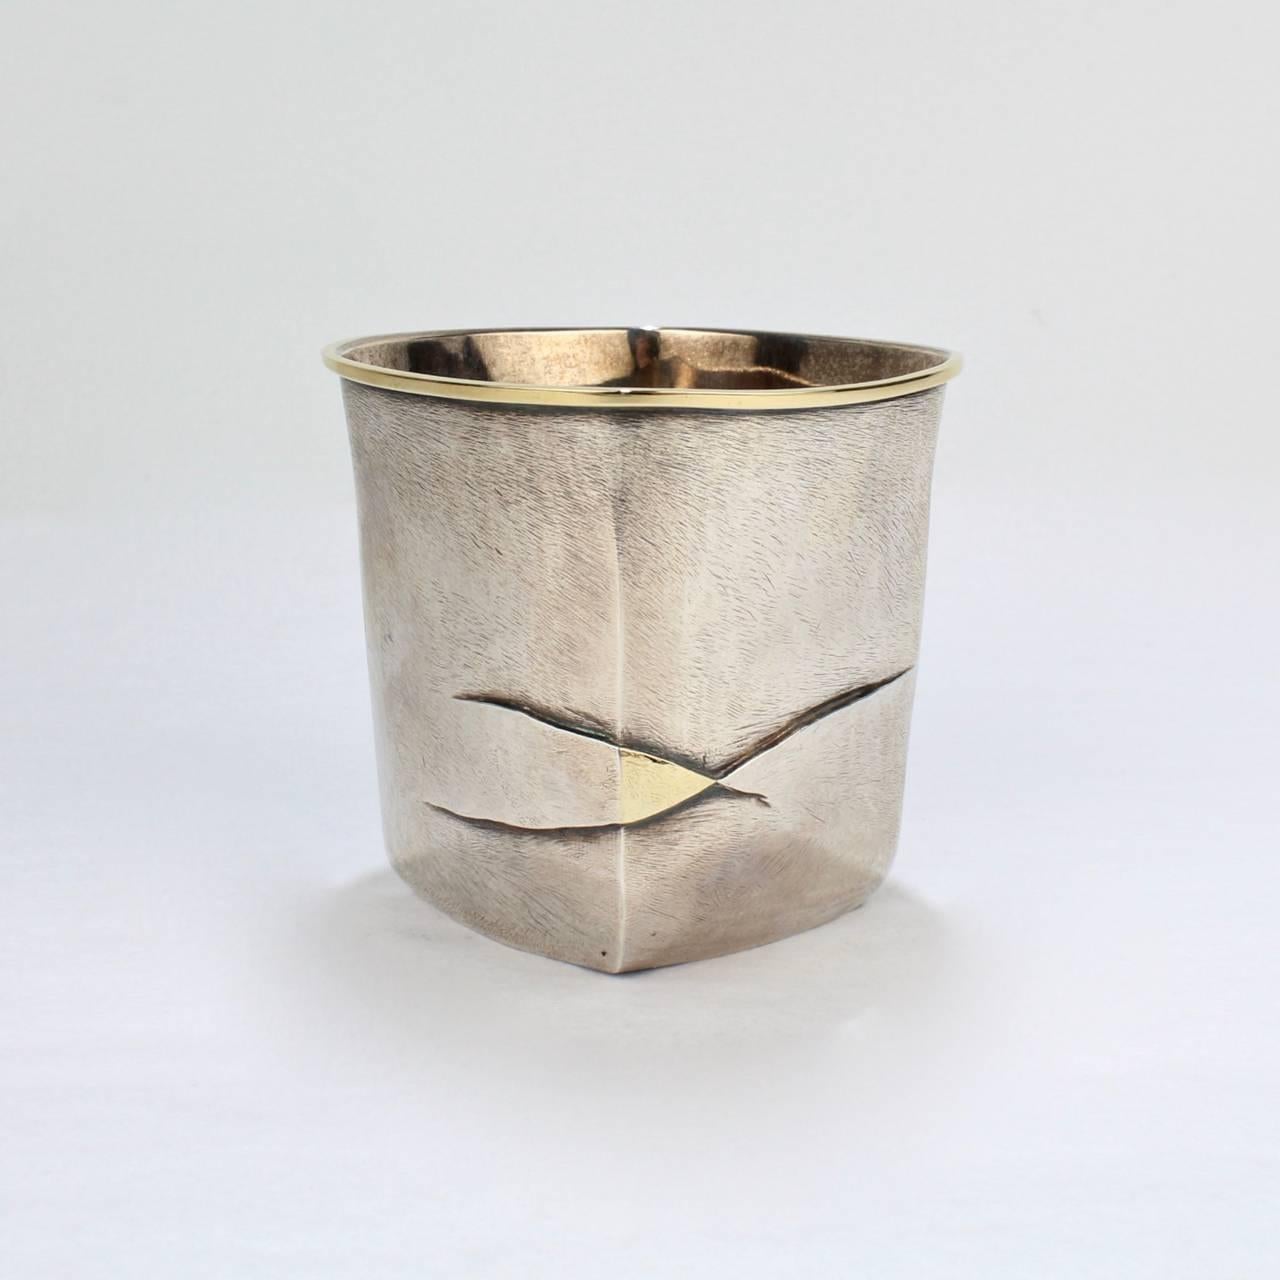 An exceptional Pat Flynn mixed metals beaker or drinking vessel in sterling silver and 18K gold.

Simply breathtaking metal-smithing from a major American craftsman, whose work is in major institutions and collections.

With an etched signature,